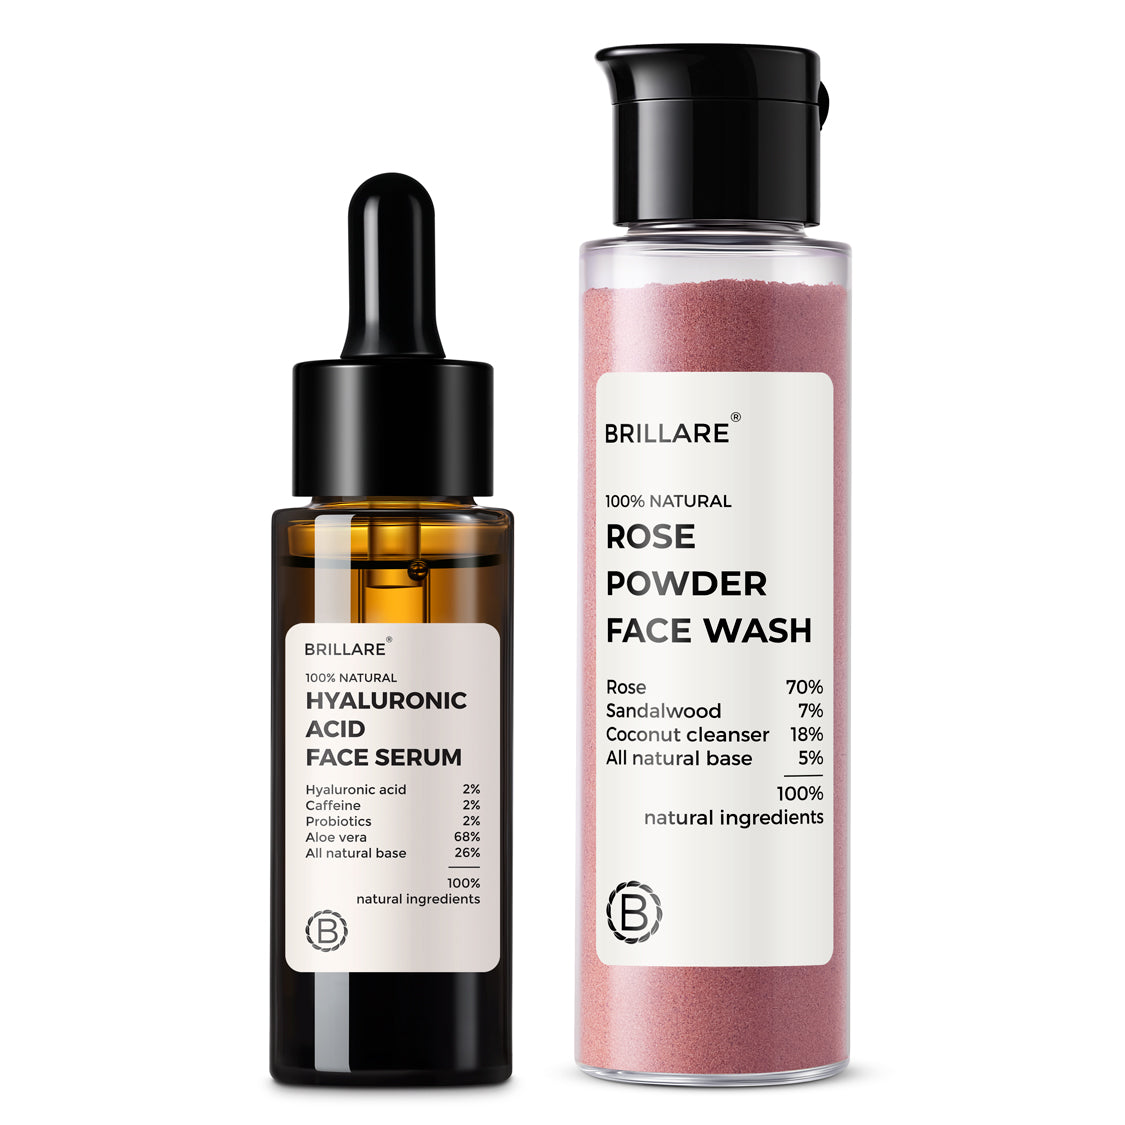 2% Hyaluronic Acid Face Serum & Rose Powder Face Wash (30g) Combo For Ageing Skin